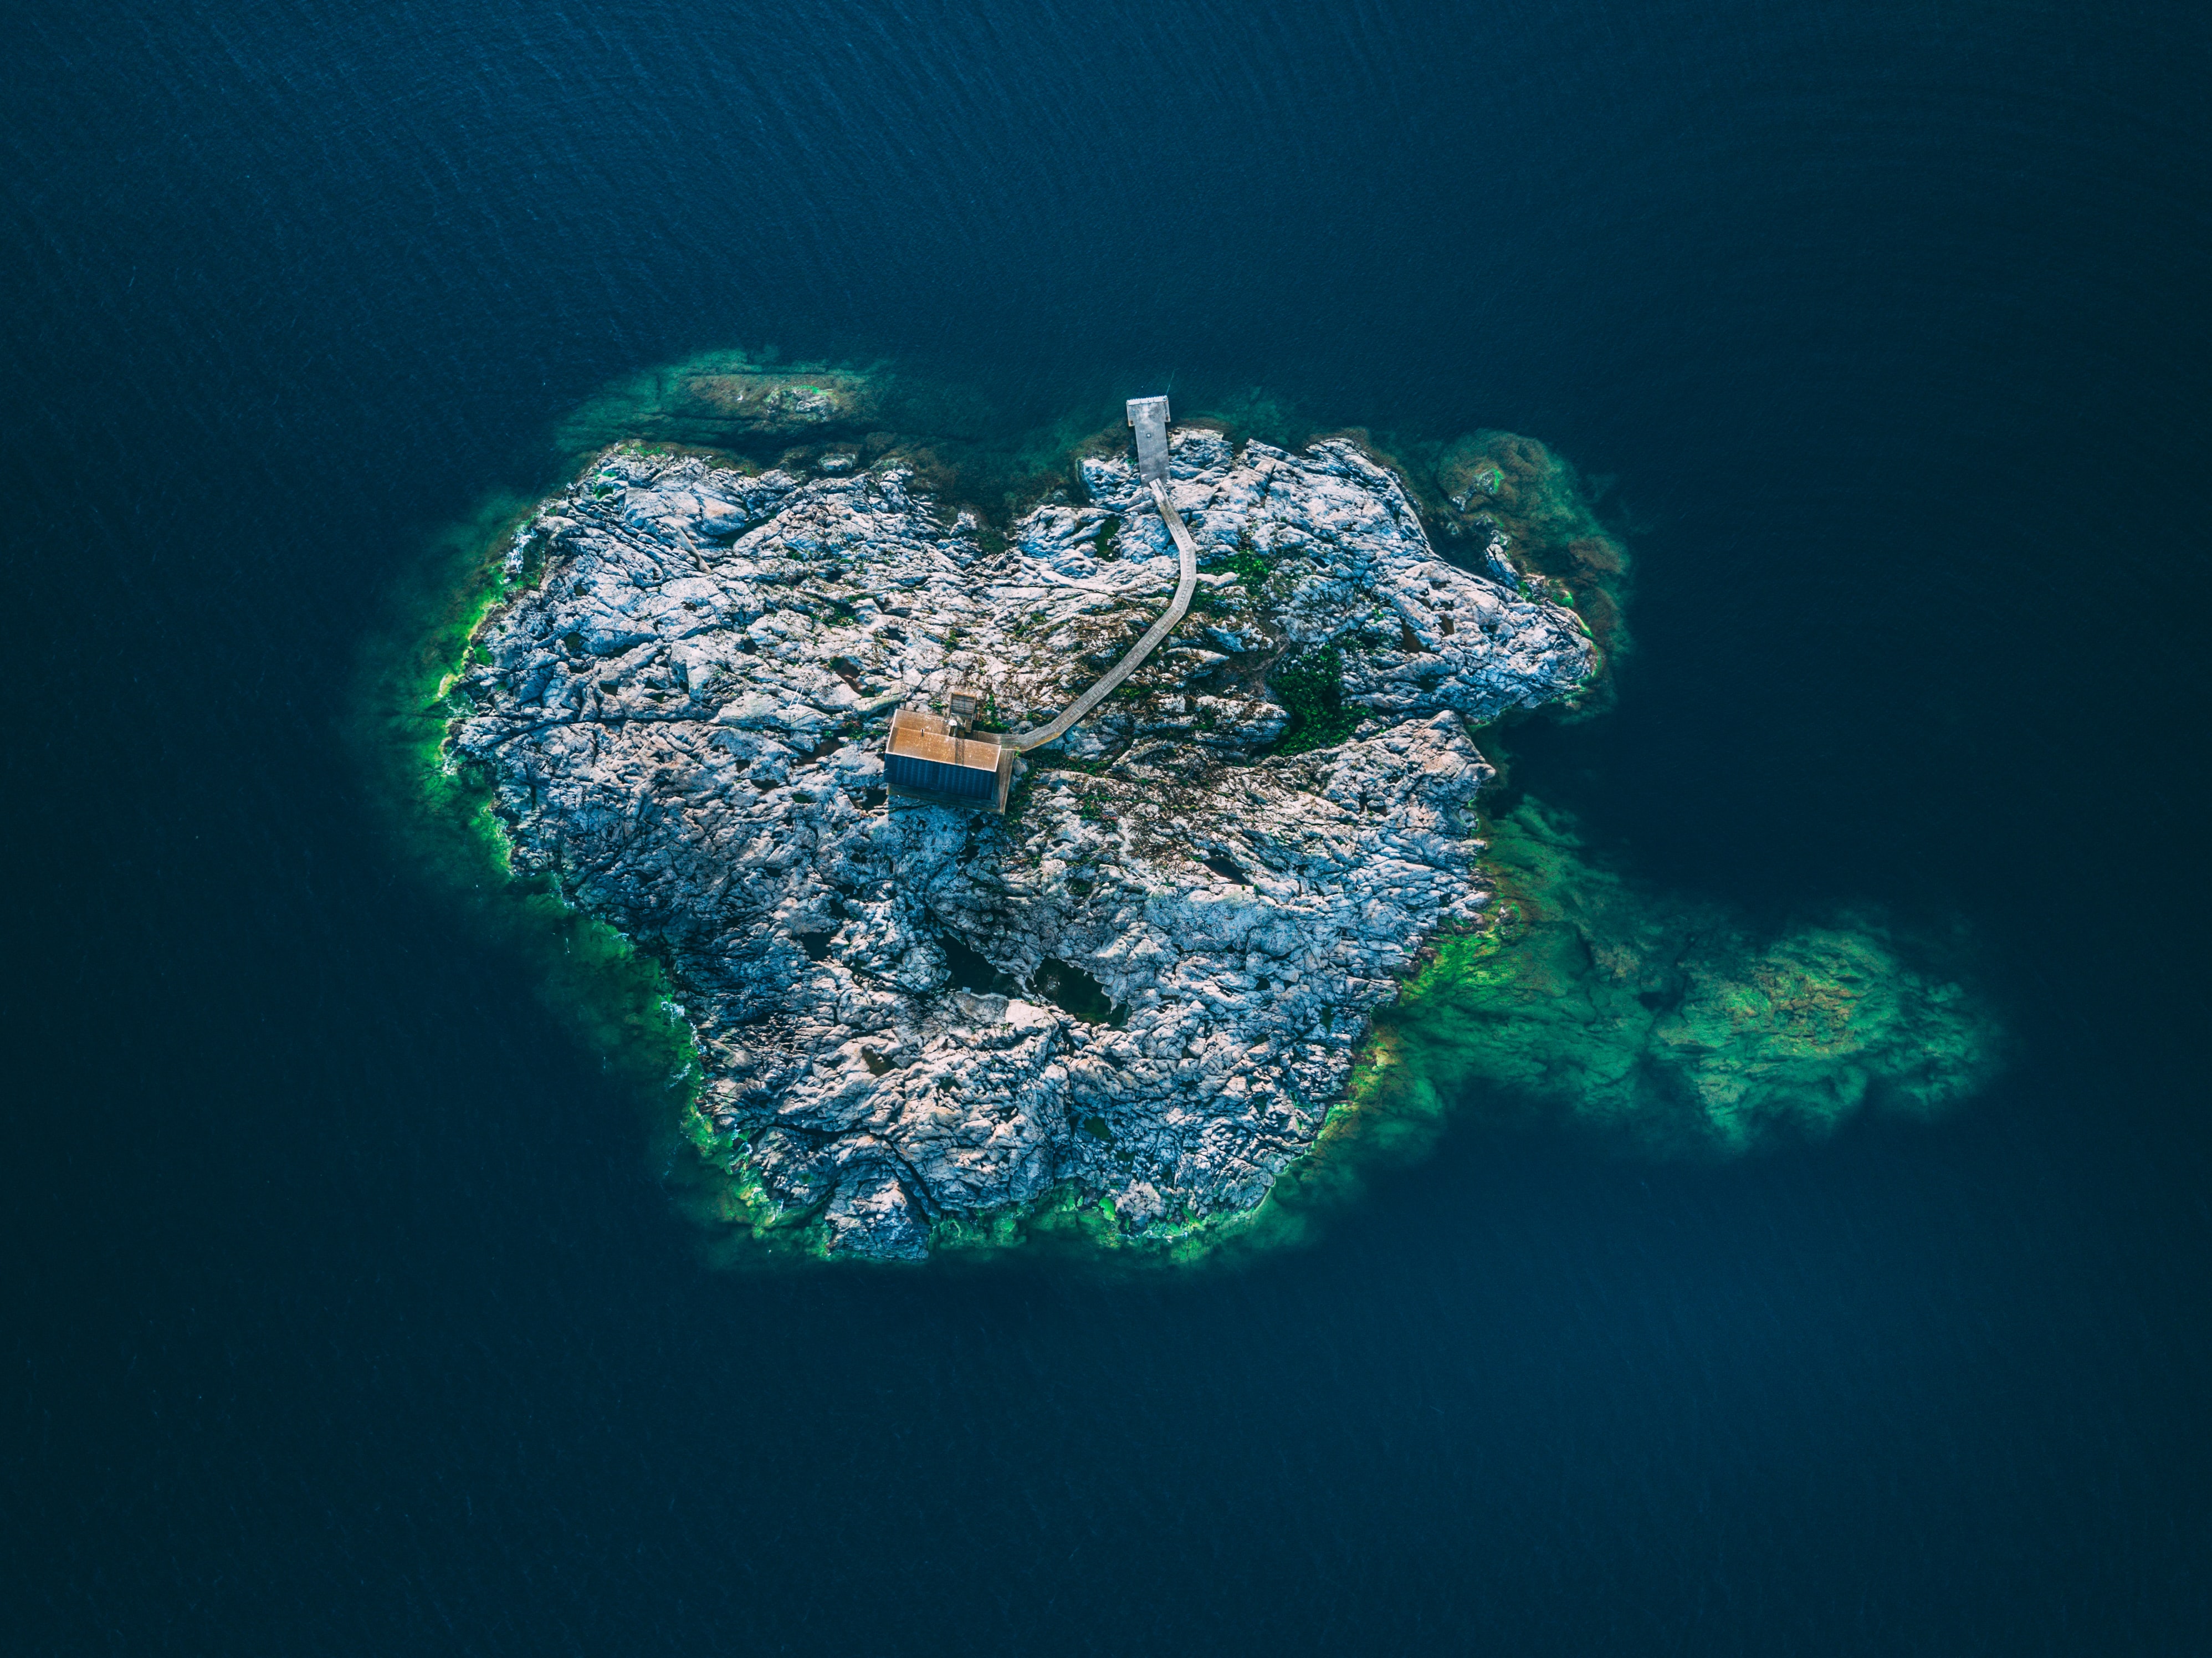 A rocky island seen from above